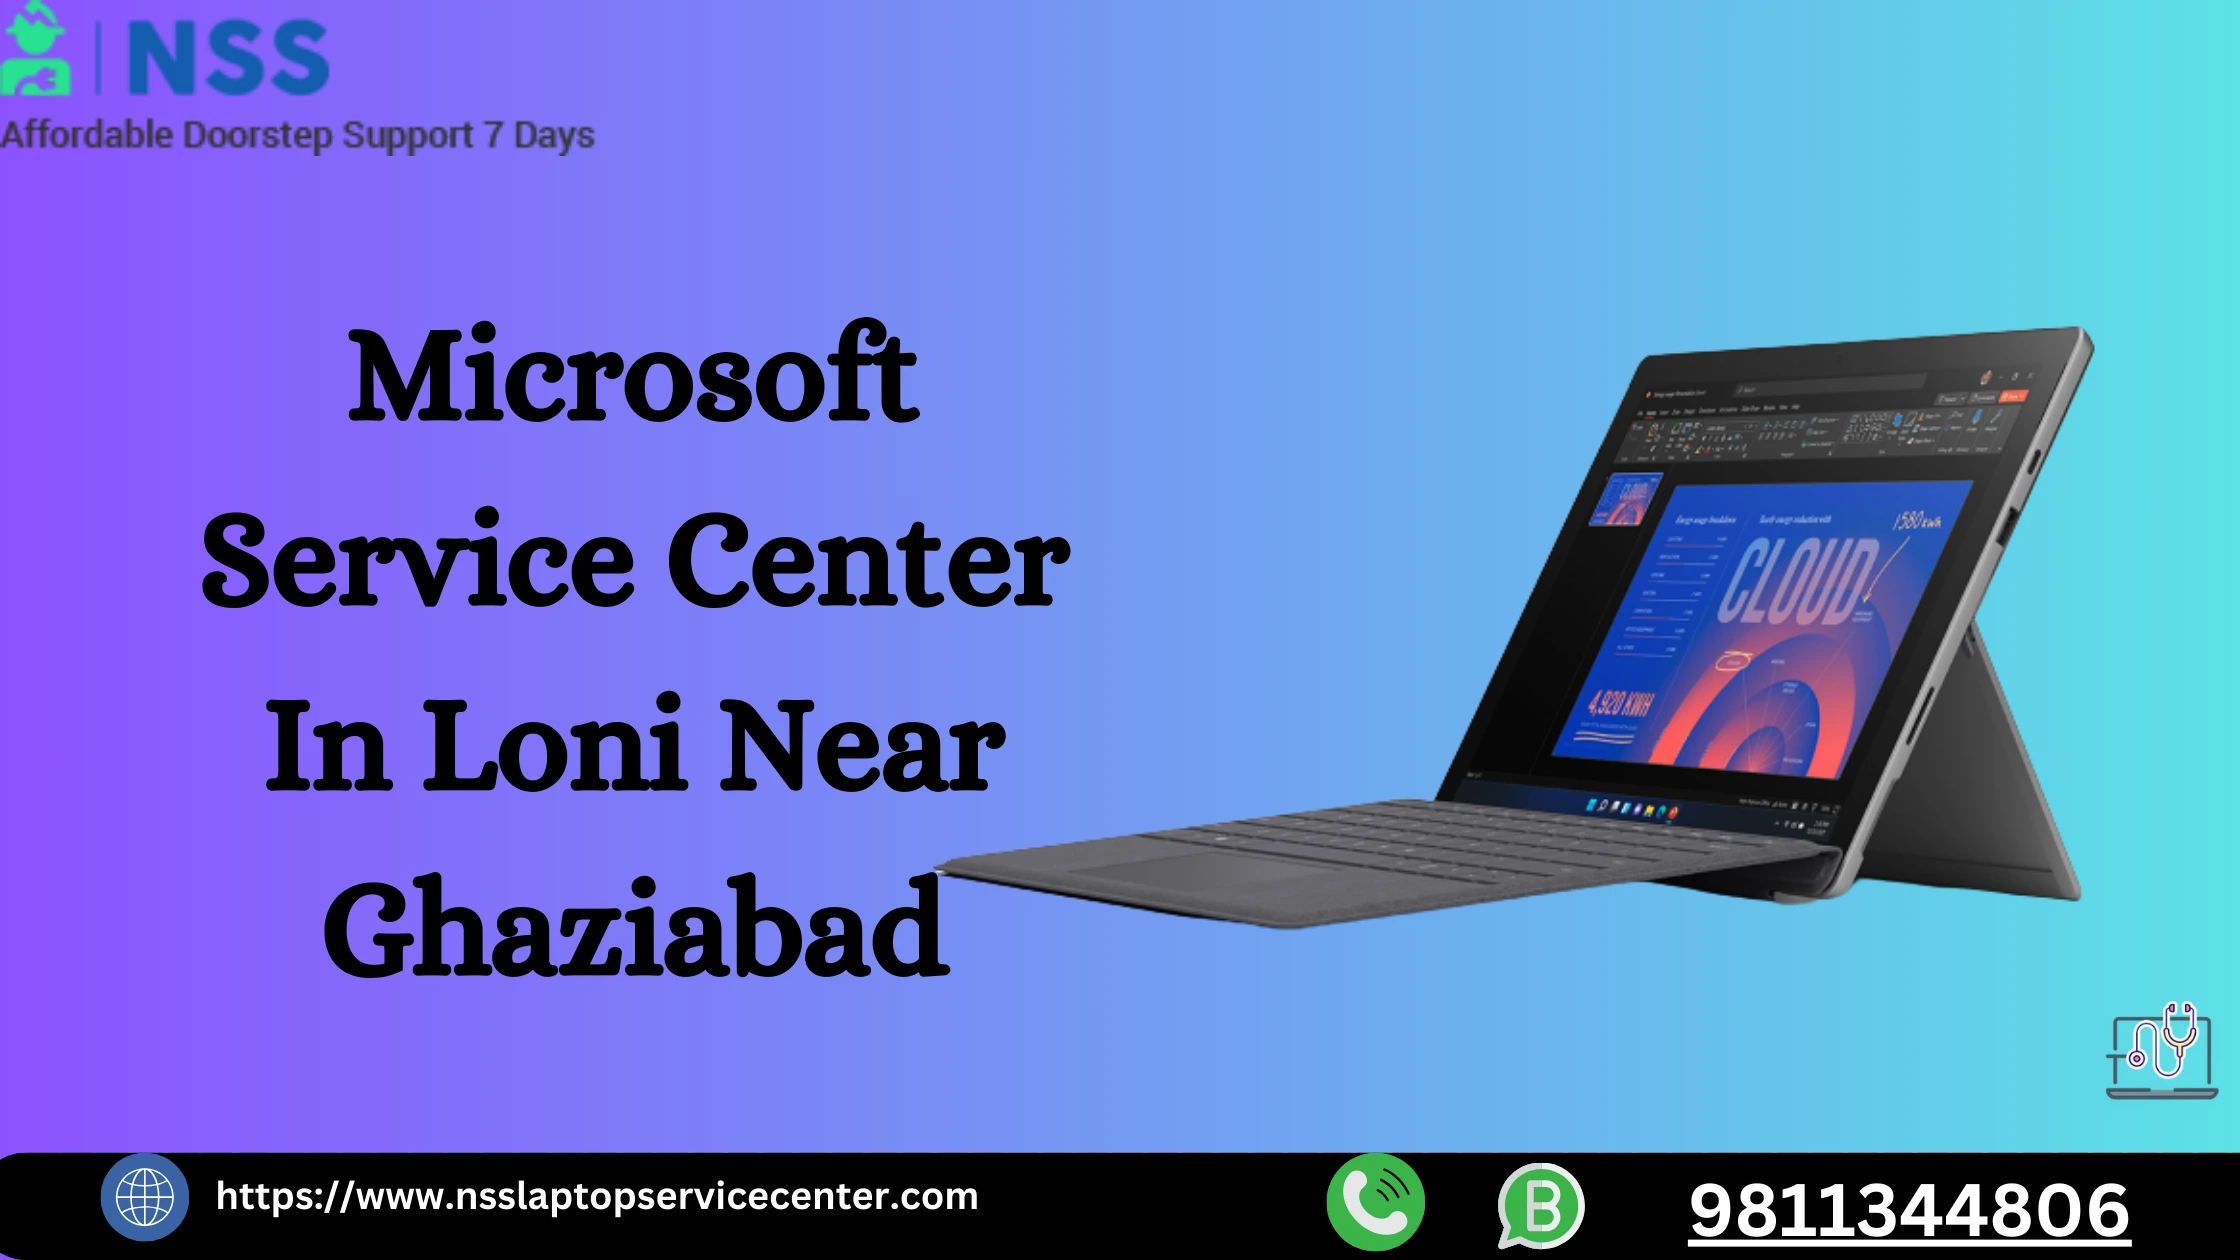 Your Trusted Microsoft Service Center in Loni Ghaziabad